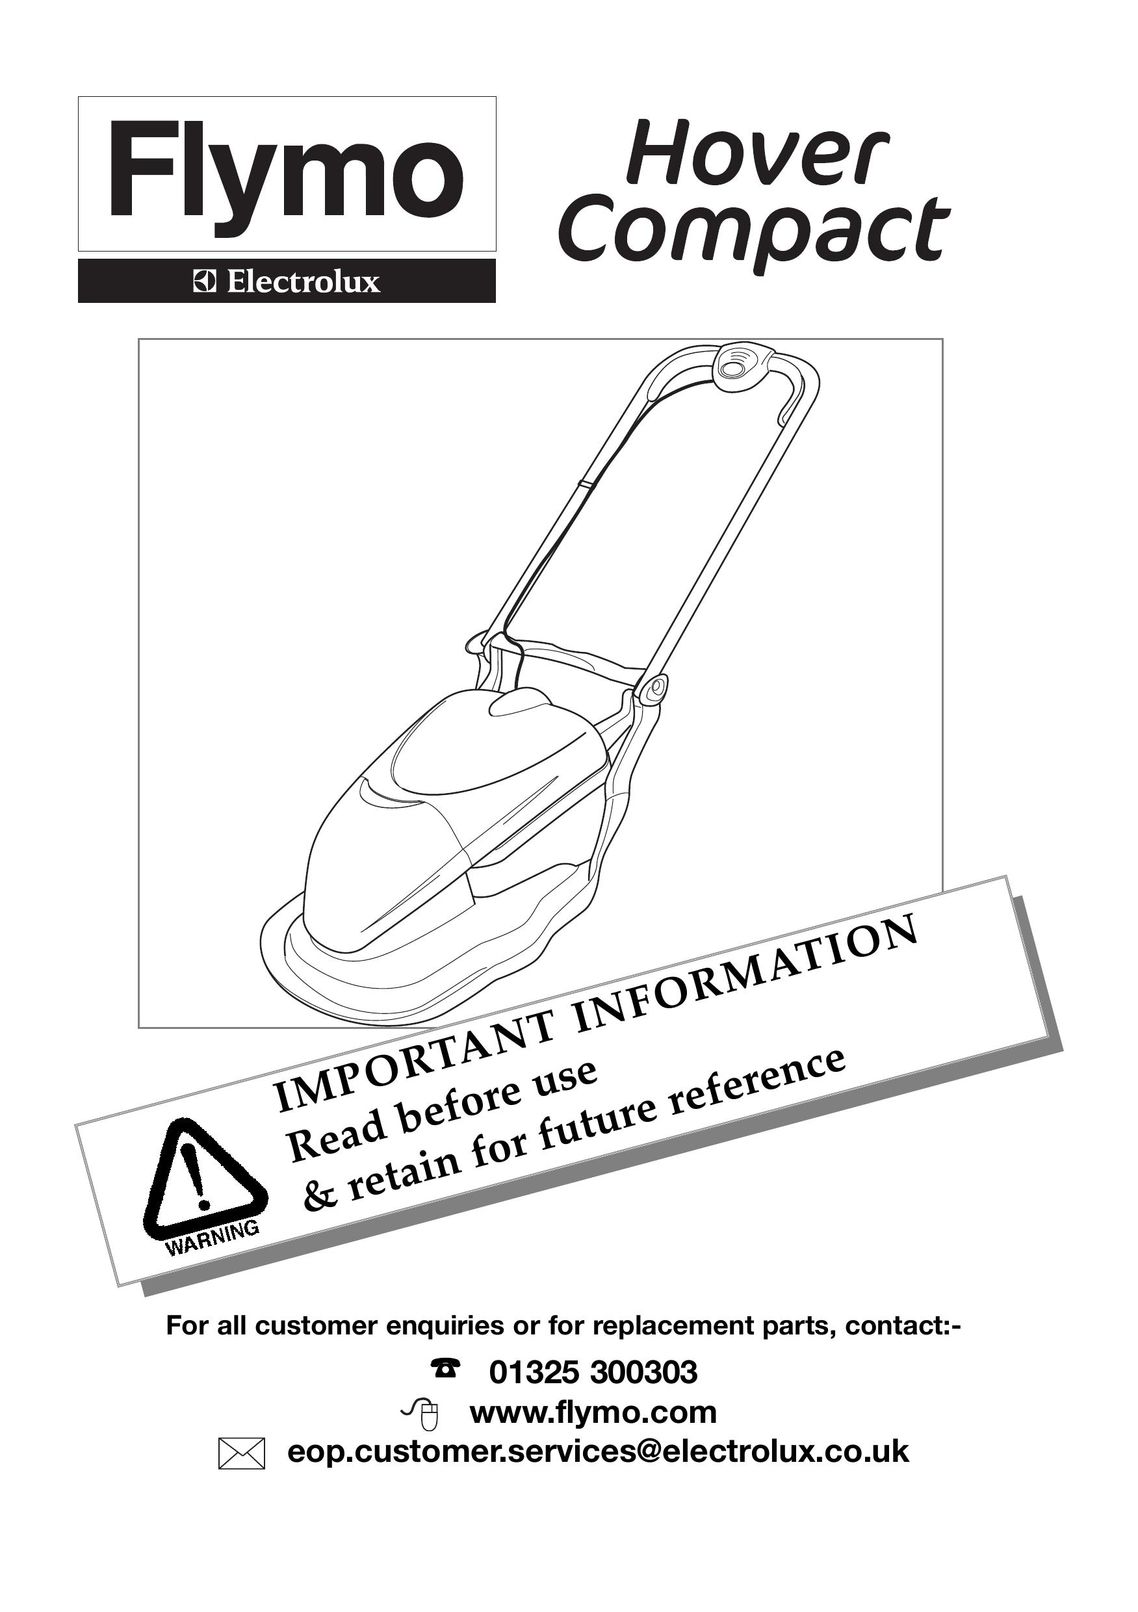 Flymo Hover Compact Vacuum Cleaner User Manual